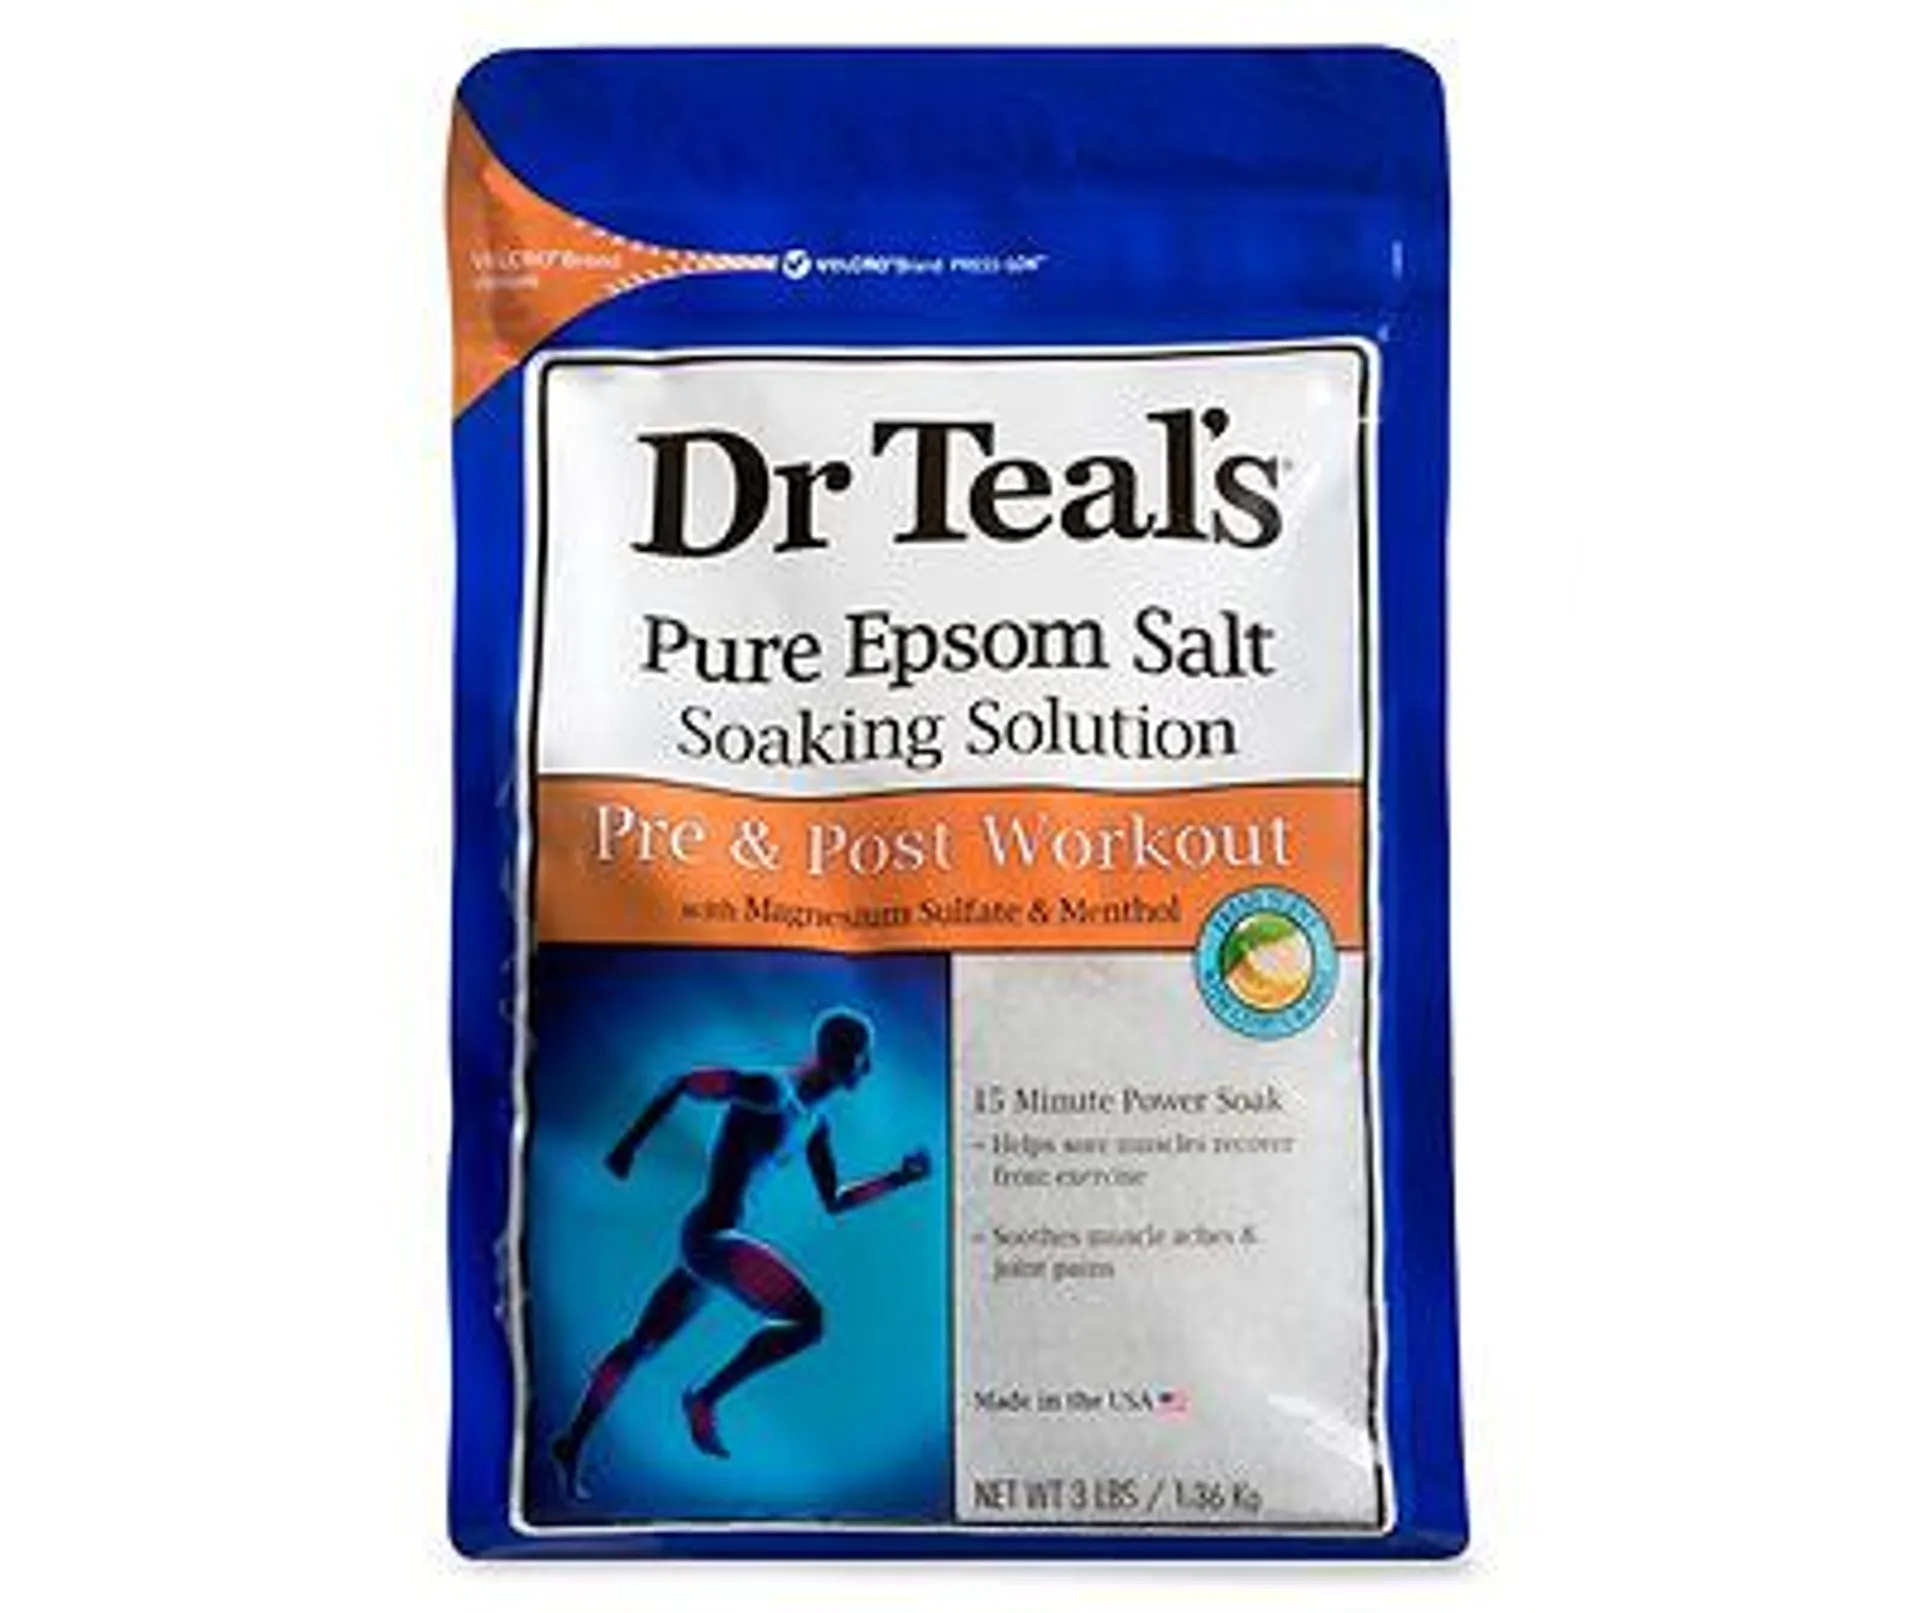 Pre & Post Workout Pure Epsom Salt Soaking Solution, 3 Lbs.